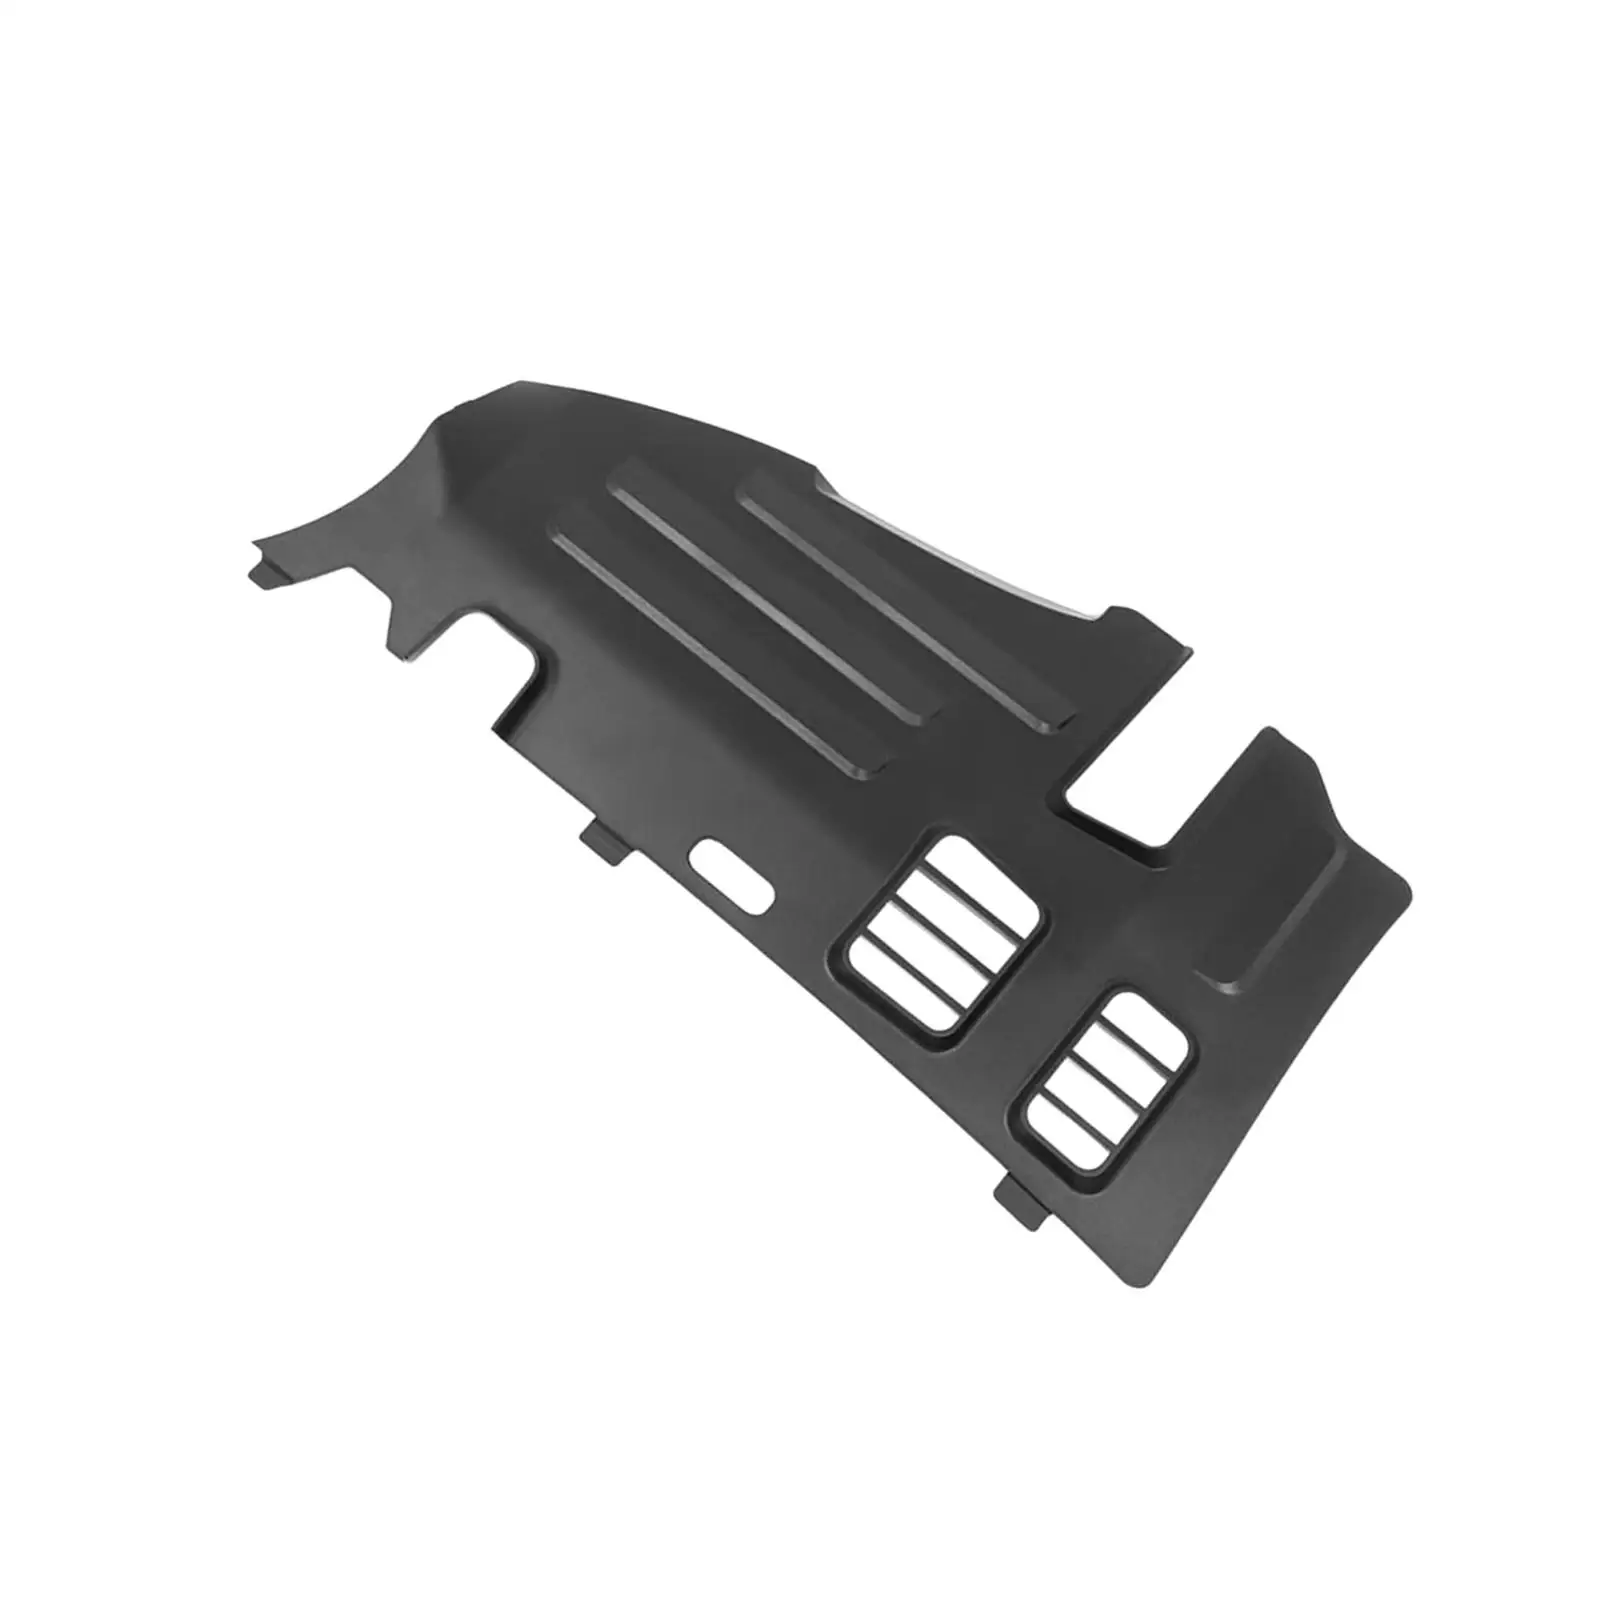 Driver Anti Kick Panel Cover Trim Main Driving Anti Kick Pad for Byd Yuan Plus Replacement High Performance Easy to Install